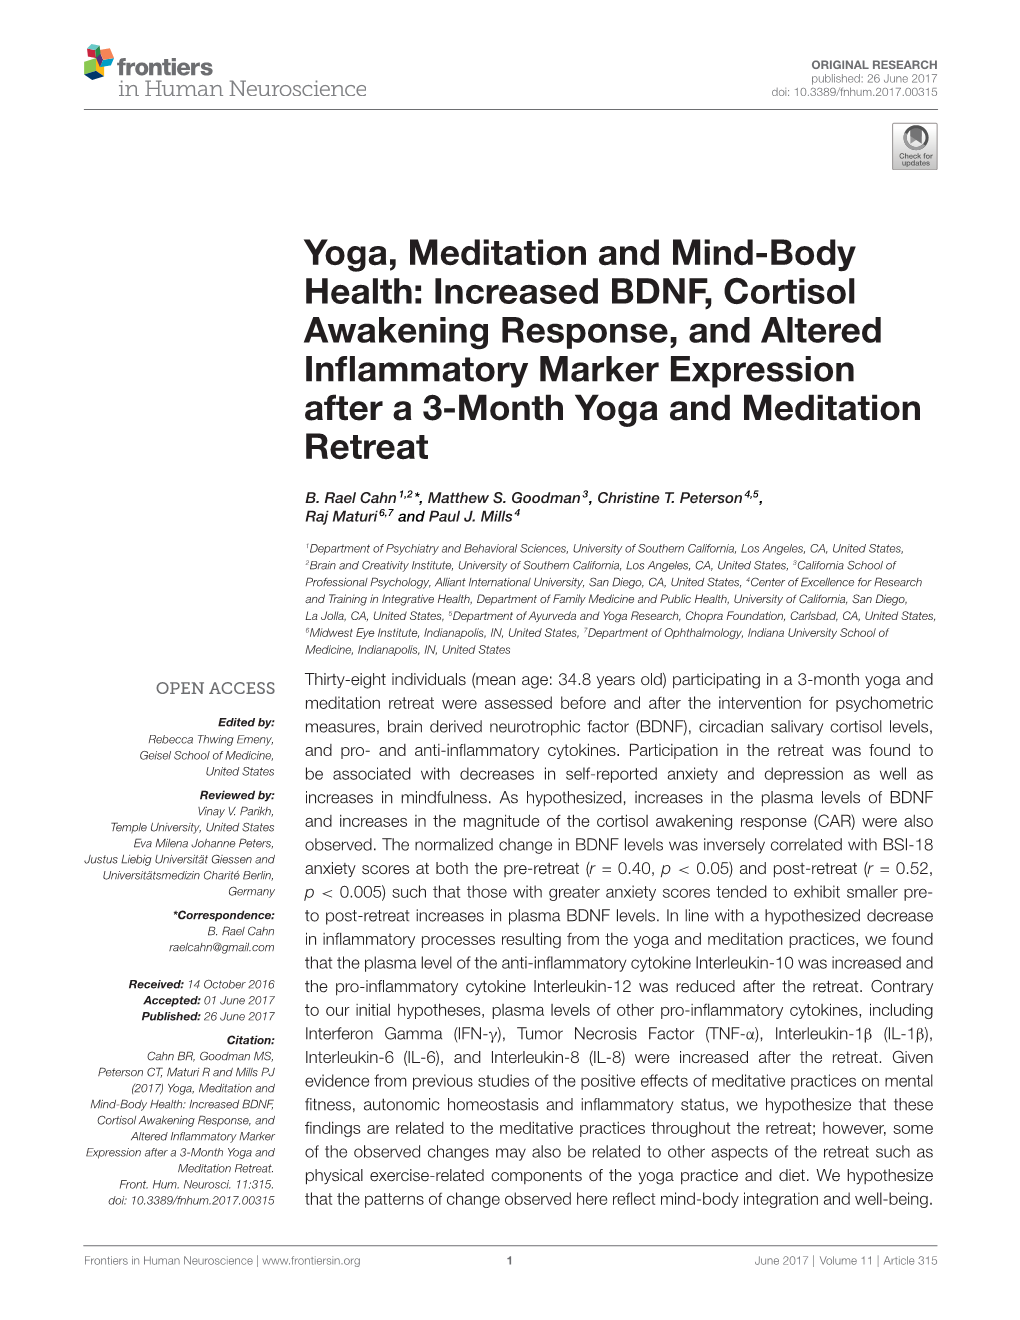 Yoga, Meditation and Mind-Body Health: Increased BDNF, Cortisol Awakening Response, and Altered Inflammatory Marker Expression A